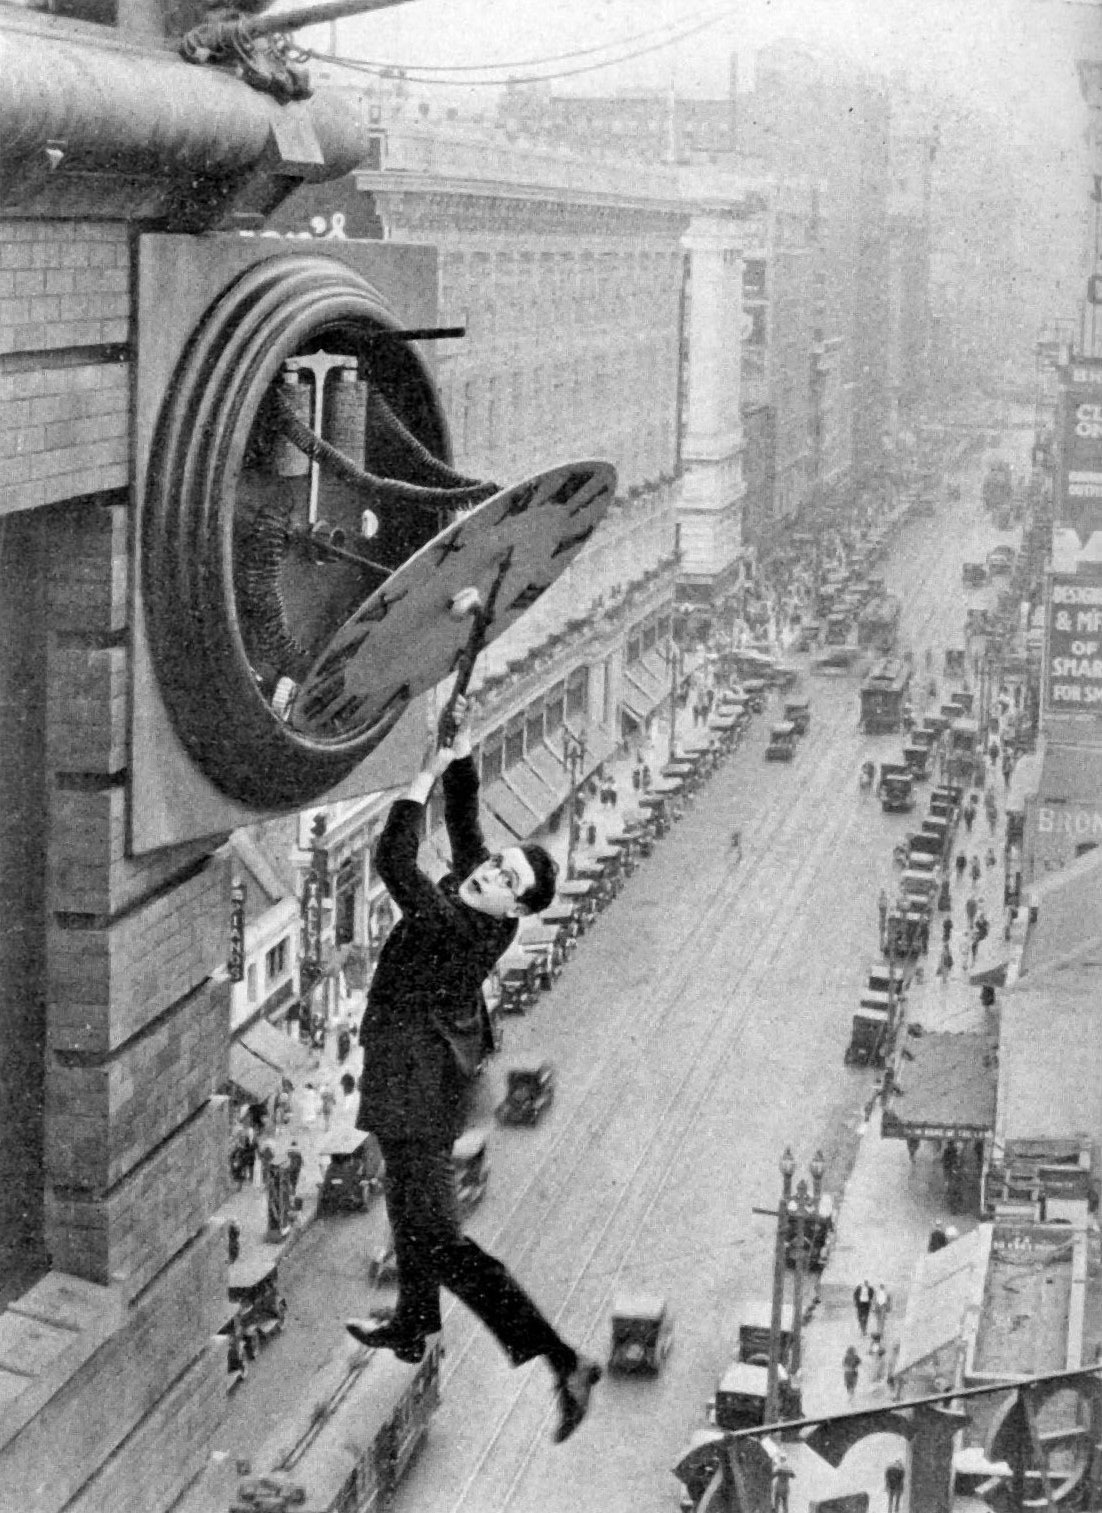 An iconic scene from the film “Safety Last!” where Harold Lloyd is seen hanging from a clock hand on top of a skyscraper.